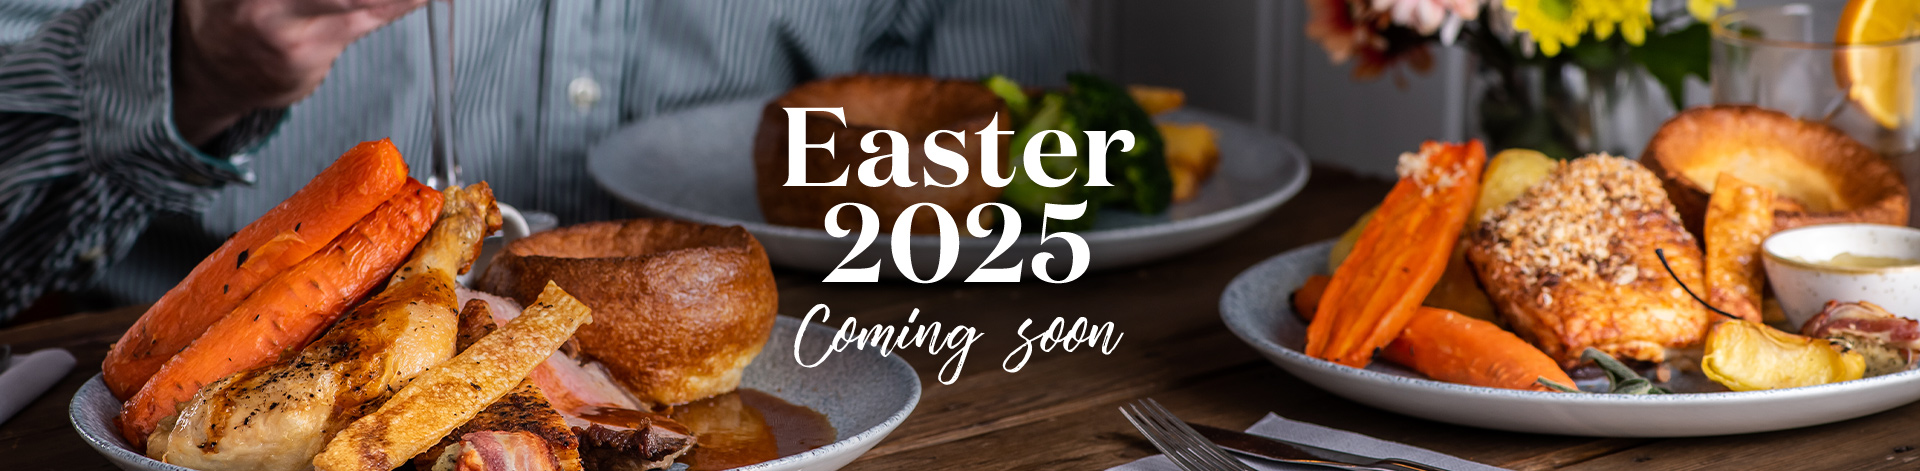 Easter at The Royal Oak in Orpington